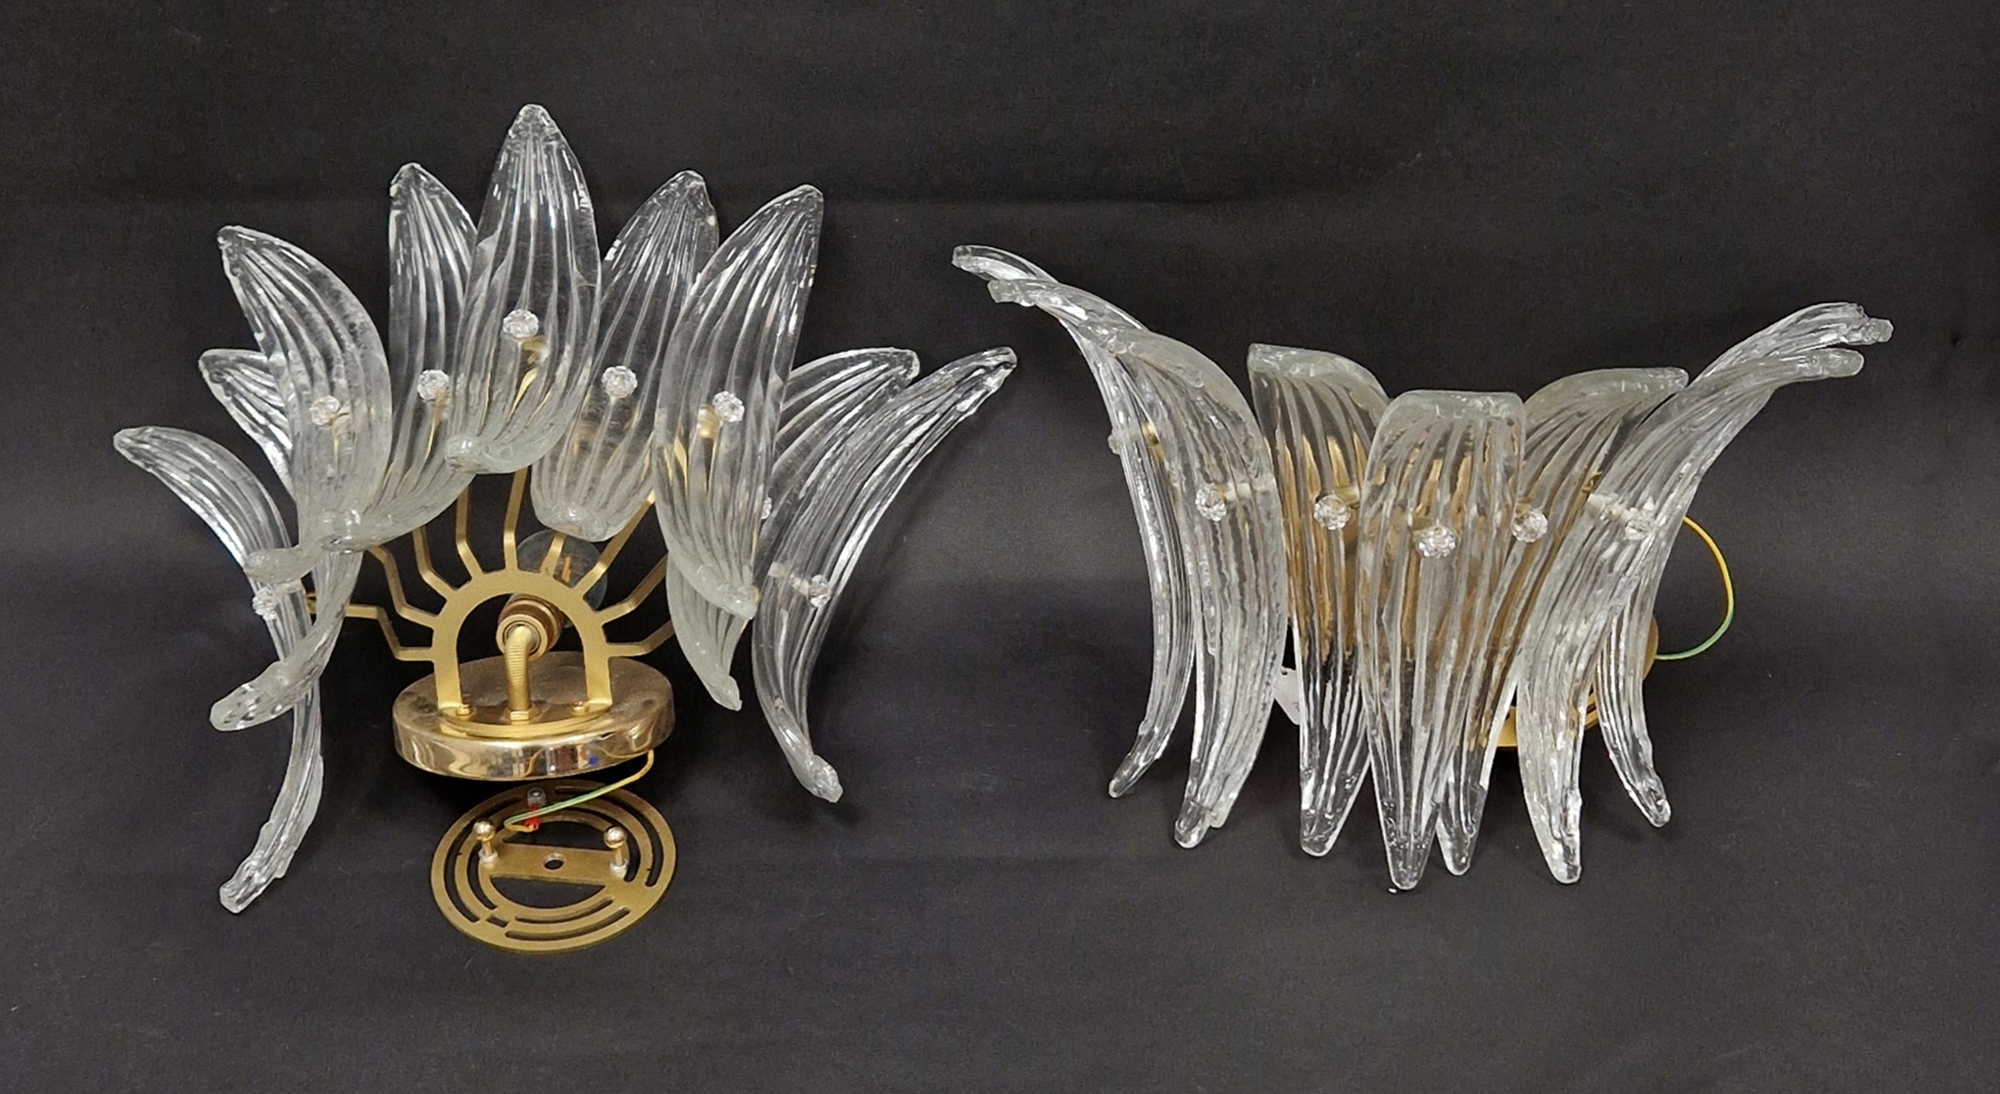 Pair Barovier & Toso Murano glass 'Palmette' wall sconces, model number 5310-1, in the form of - Image 2 of 3